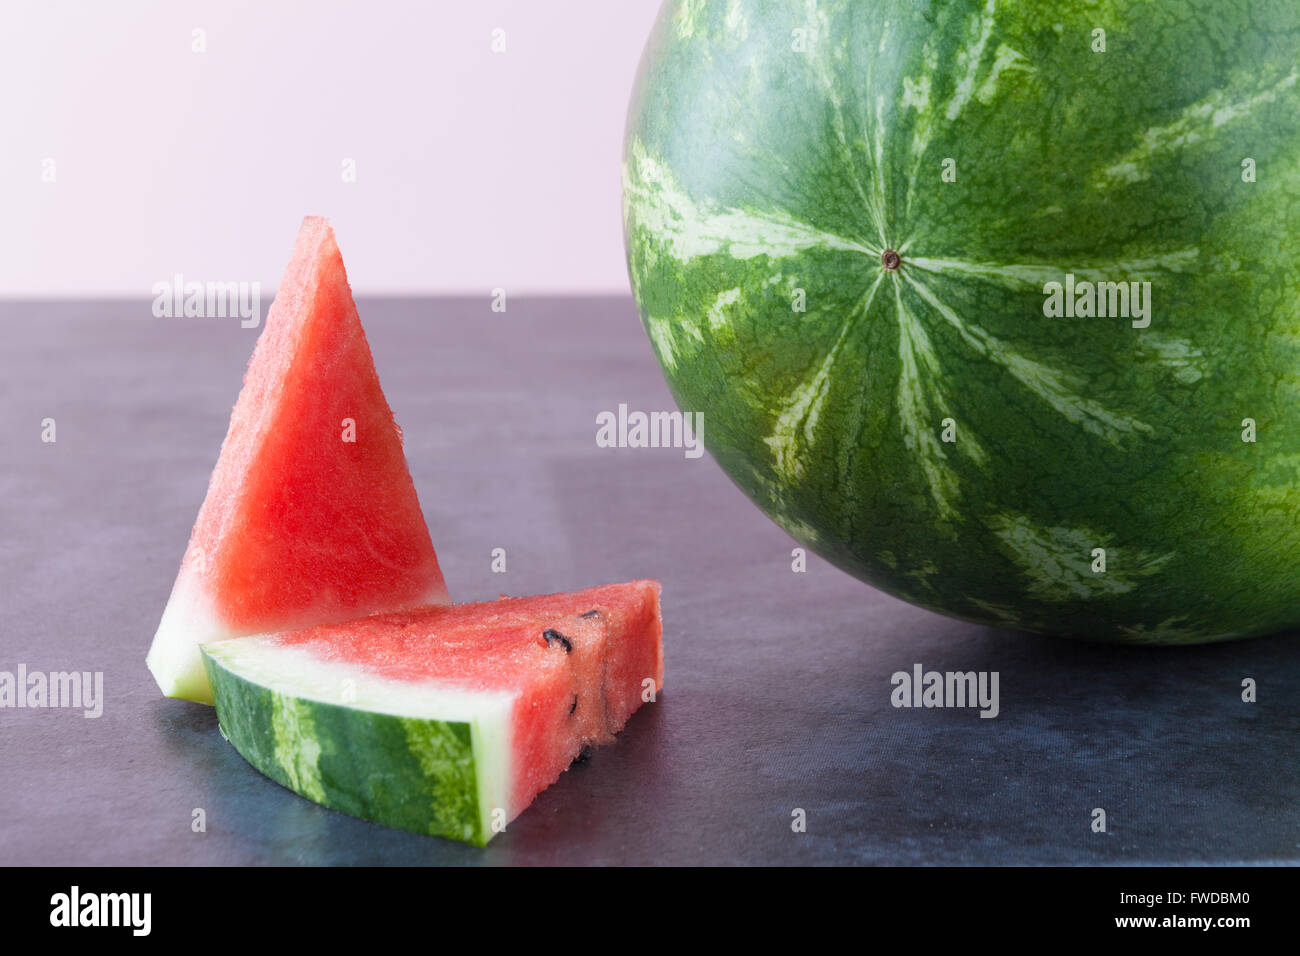 Whole and sliced watermelon on dark grungy surface with copy space. Shallow depth of field. Stock Photo